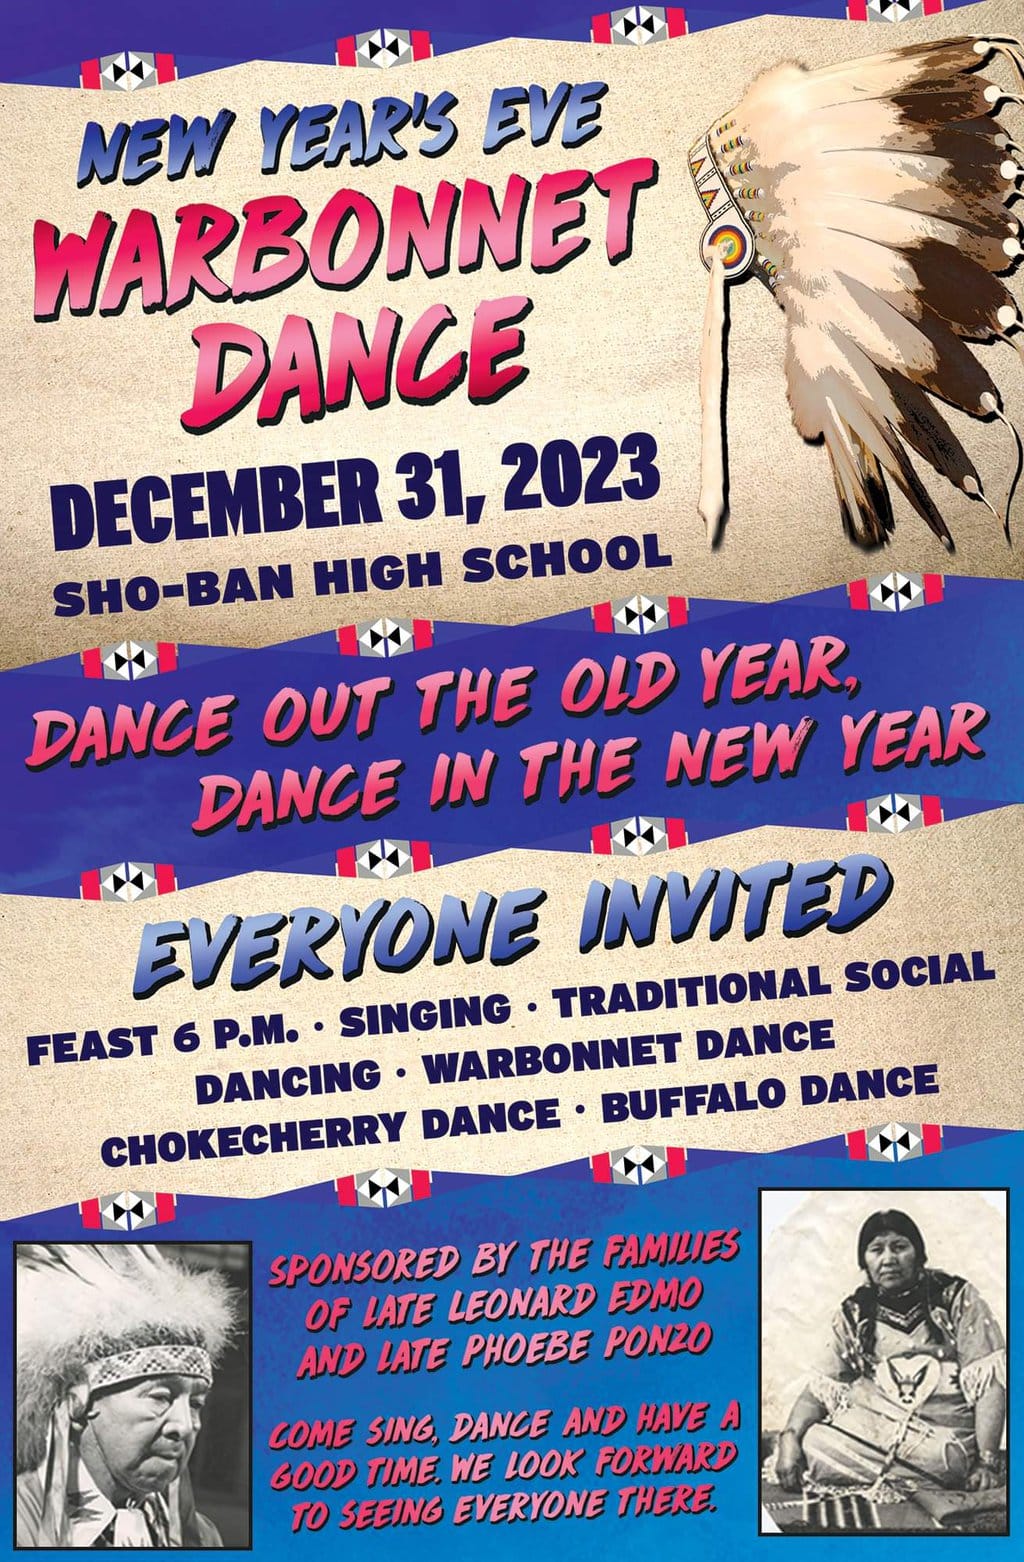 New Year's Eve Warbonnet Dance